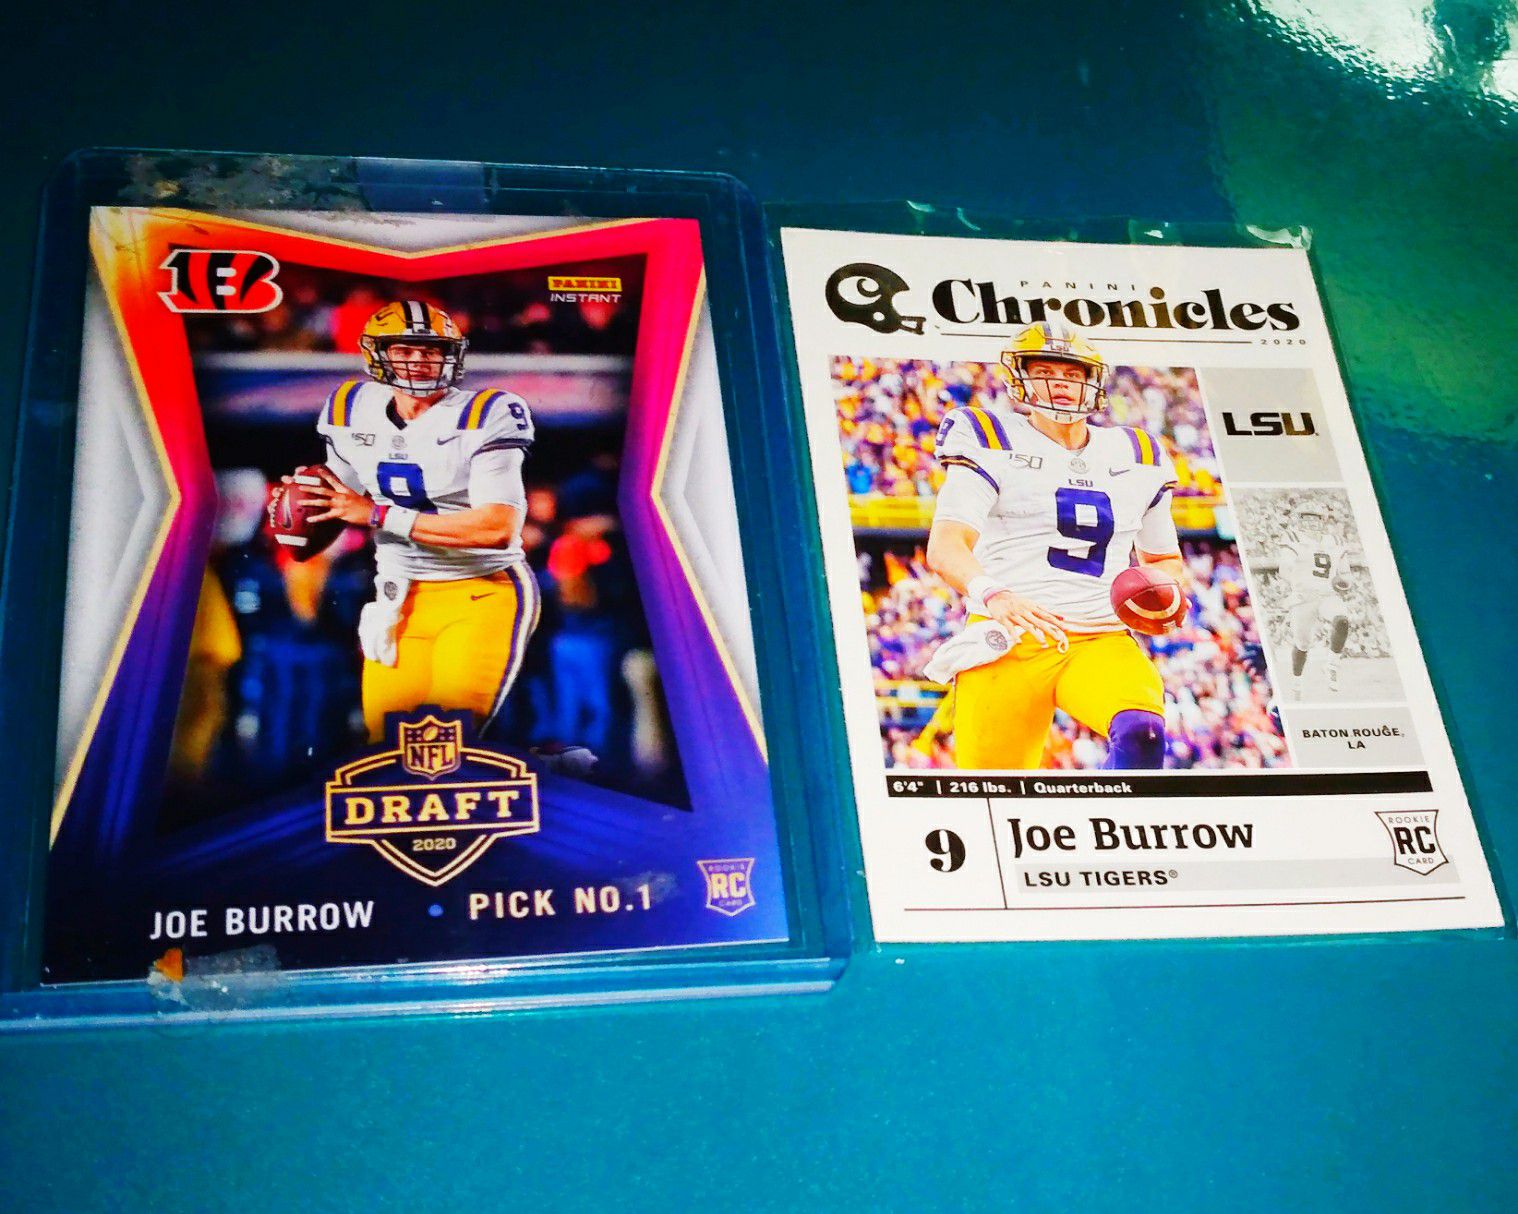 Rare 2- CARD LOT OF 2020Joe BURROW CARDS 2020 CHRONICLES RC ANS THE 1ST OF JUST SLIGHTLY OVER 8000 OFFICIAL NFL DRAFT IN MINT CONDITION